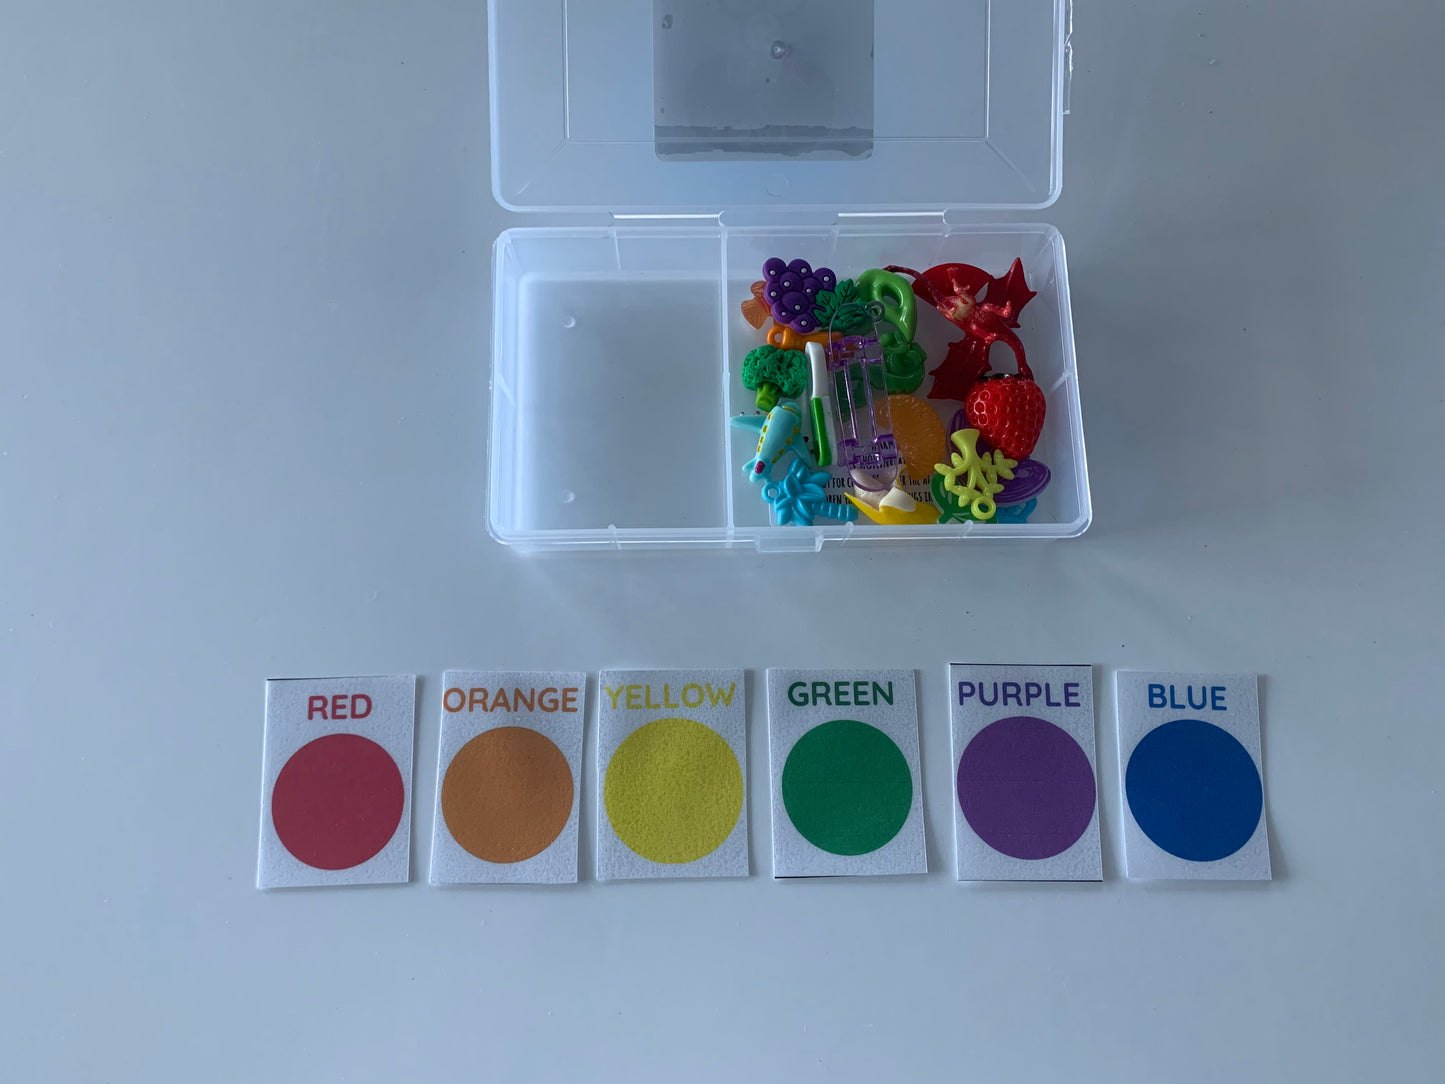 Color Sort Task Box Preschool Color Matching Trinkets for Sorting  Busy Box Speech Therapy Mini Objects I Spy Trinkets